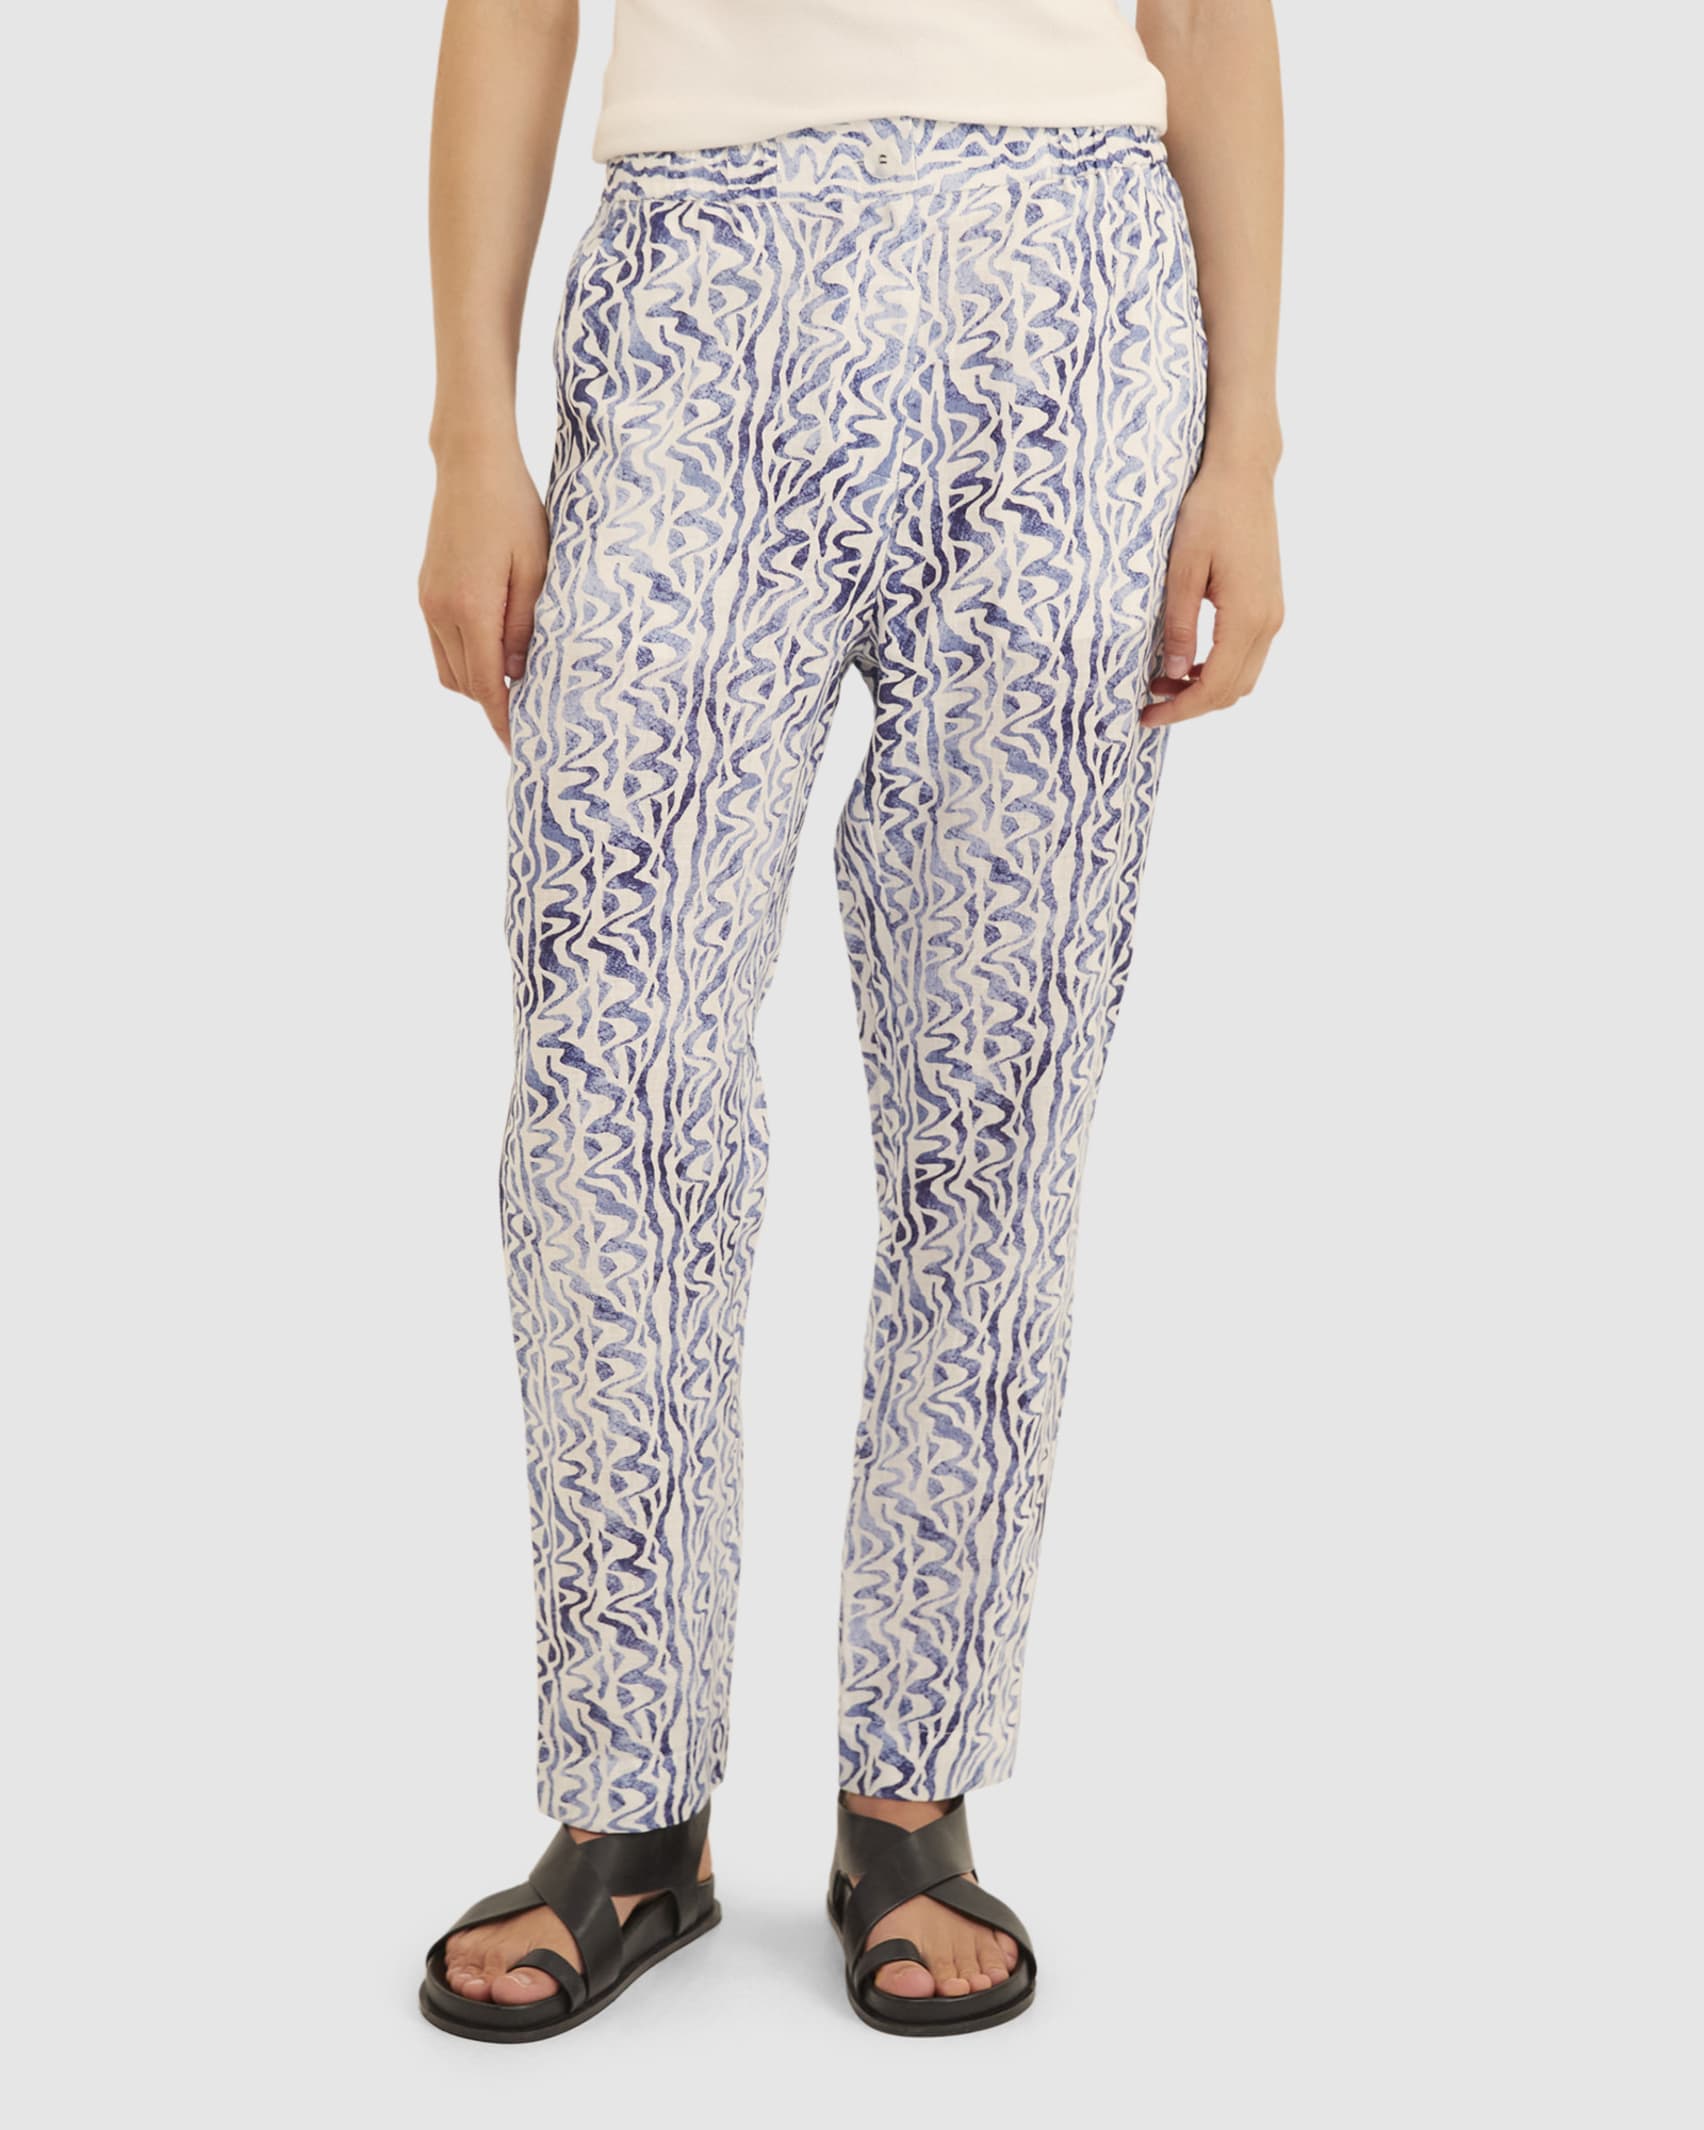 Loria Linen Pant in BLUE/WHITE